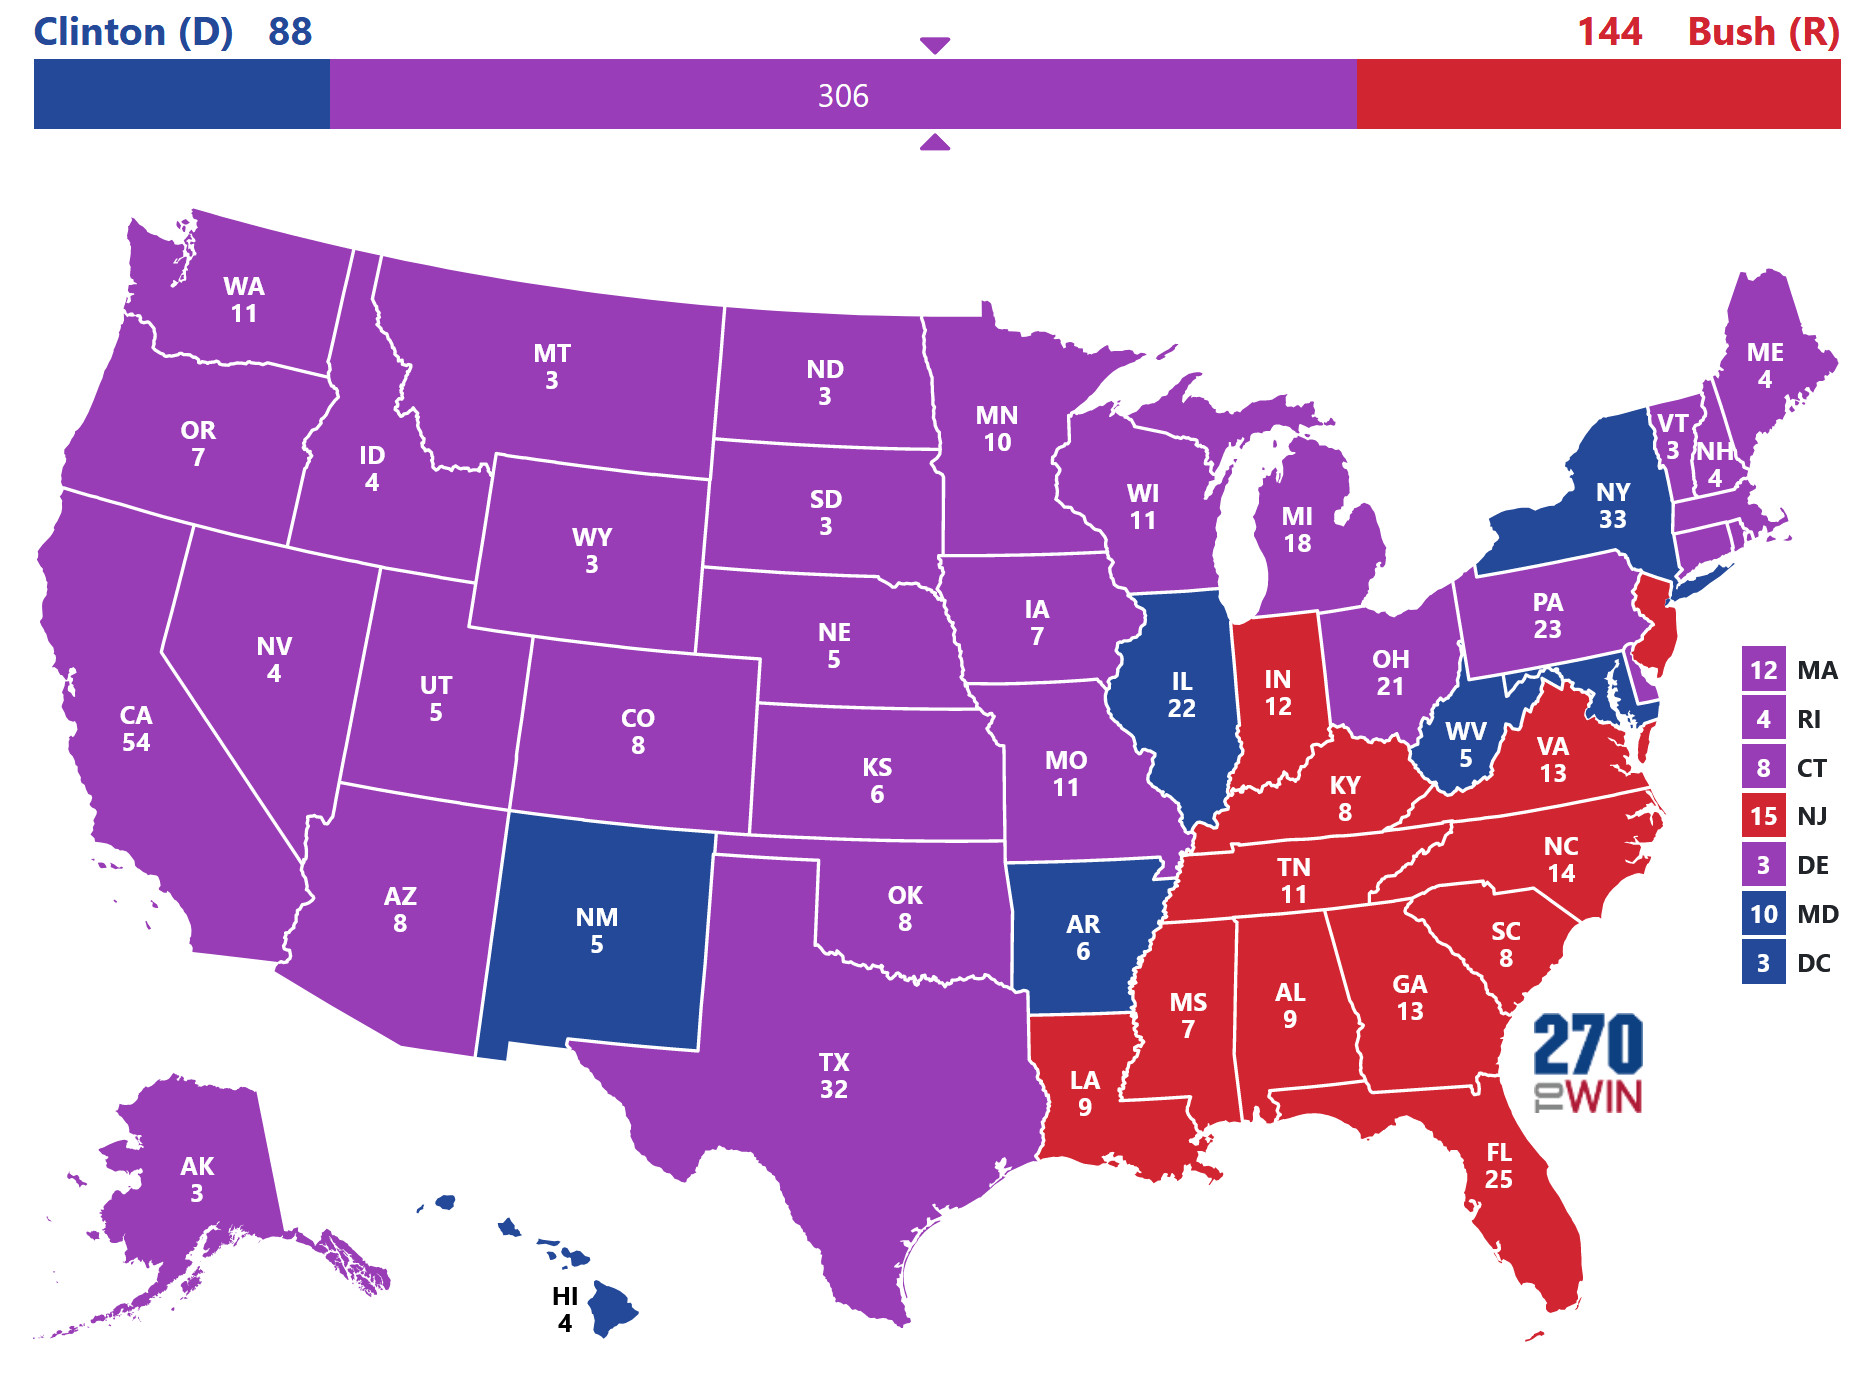 Perot's electoral map assuming an elastic swing to pre-dropout polling.